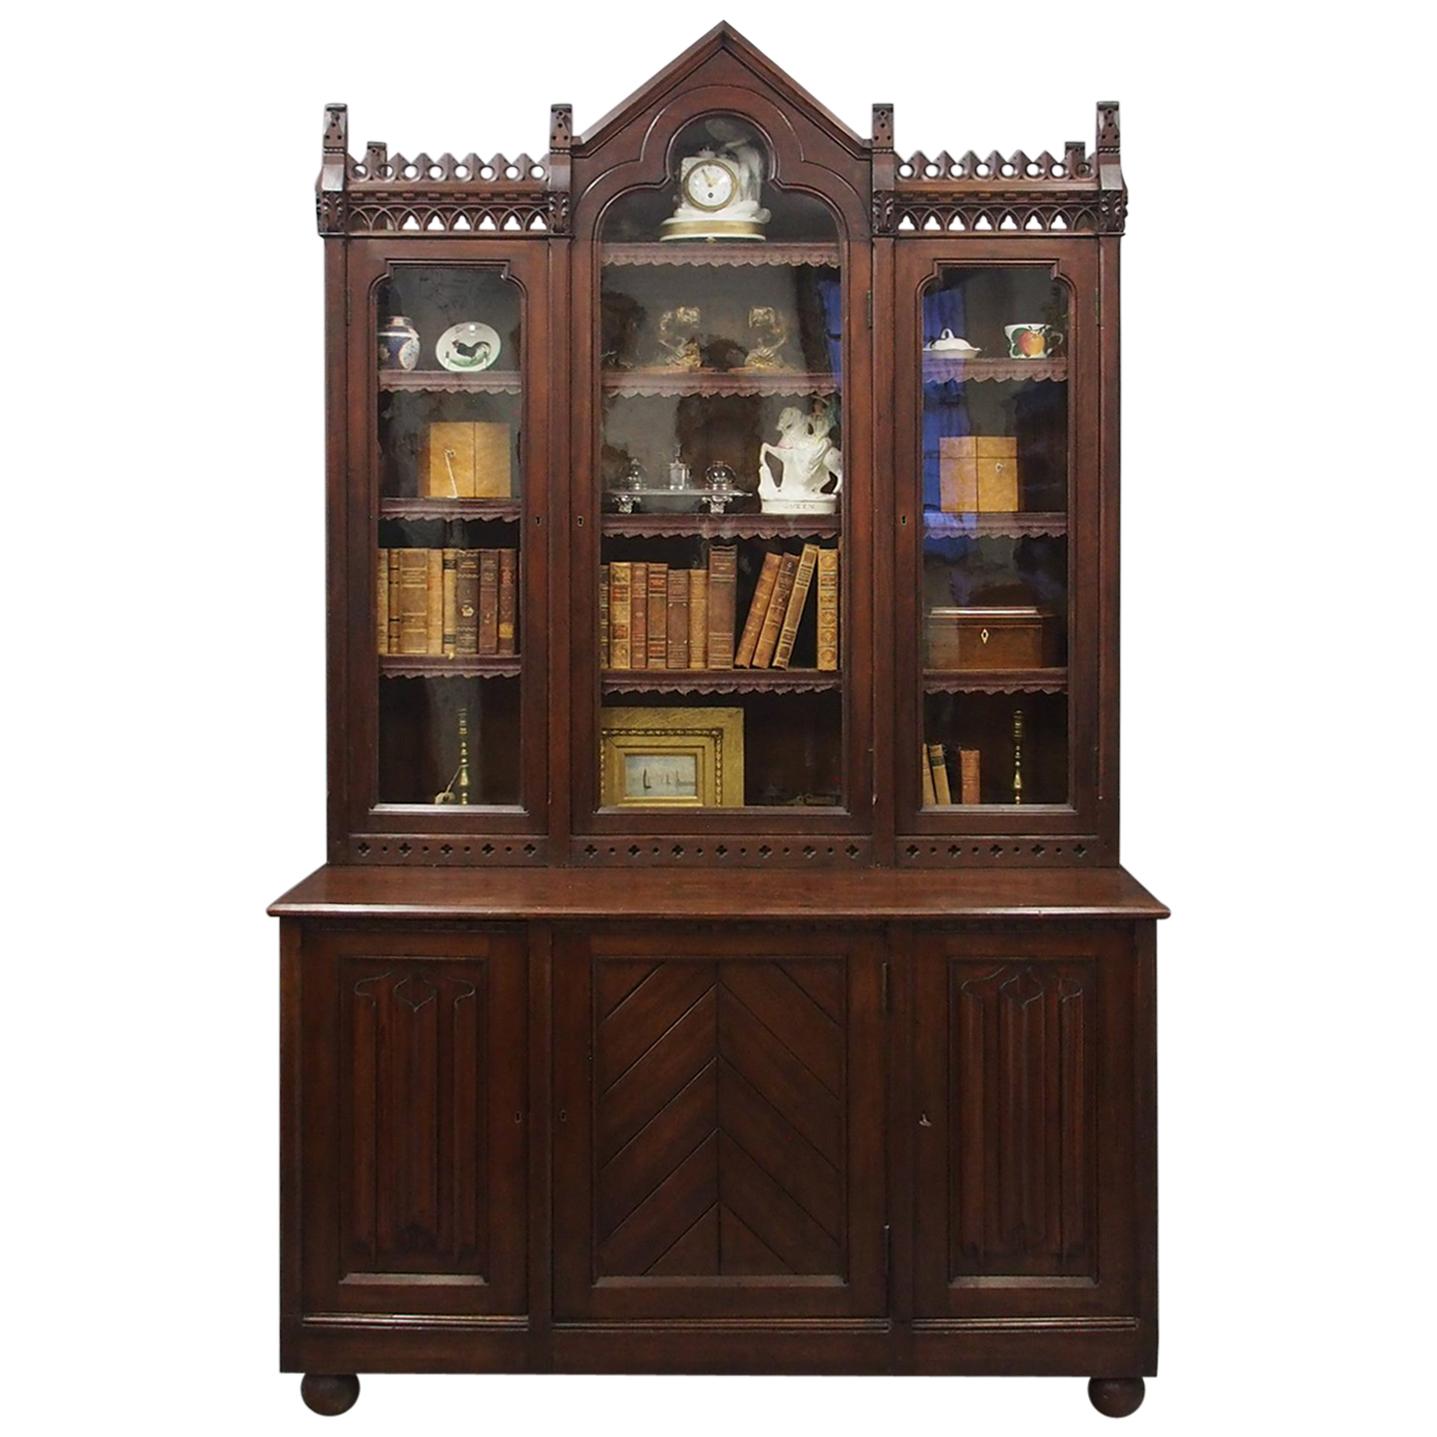 Gothic Scottish Pitch Pine Cabinet Bookcase For Sale